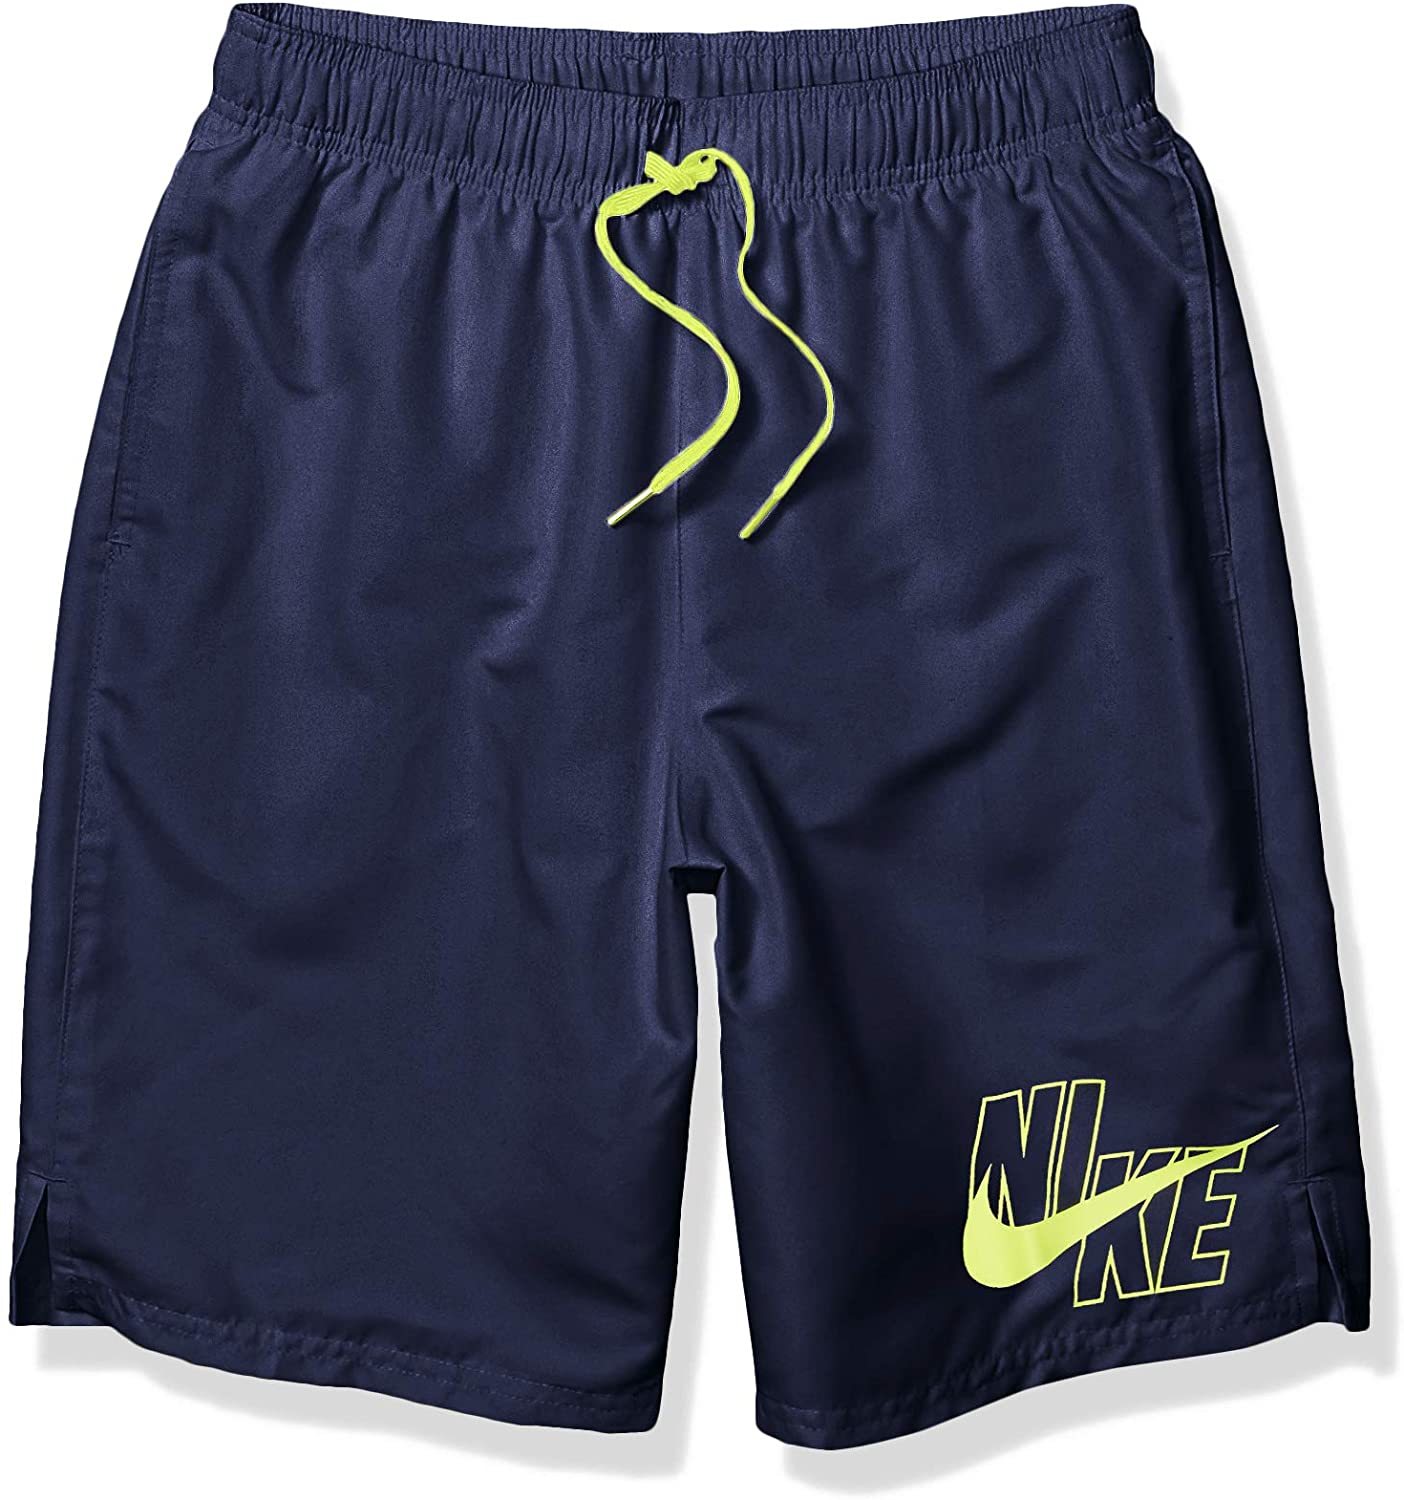 Men's Nike Logo Solid Lap 9" Volley Short Swim Trunk in Midnight Navy color from the front